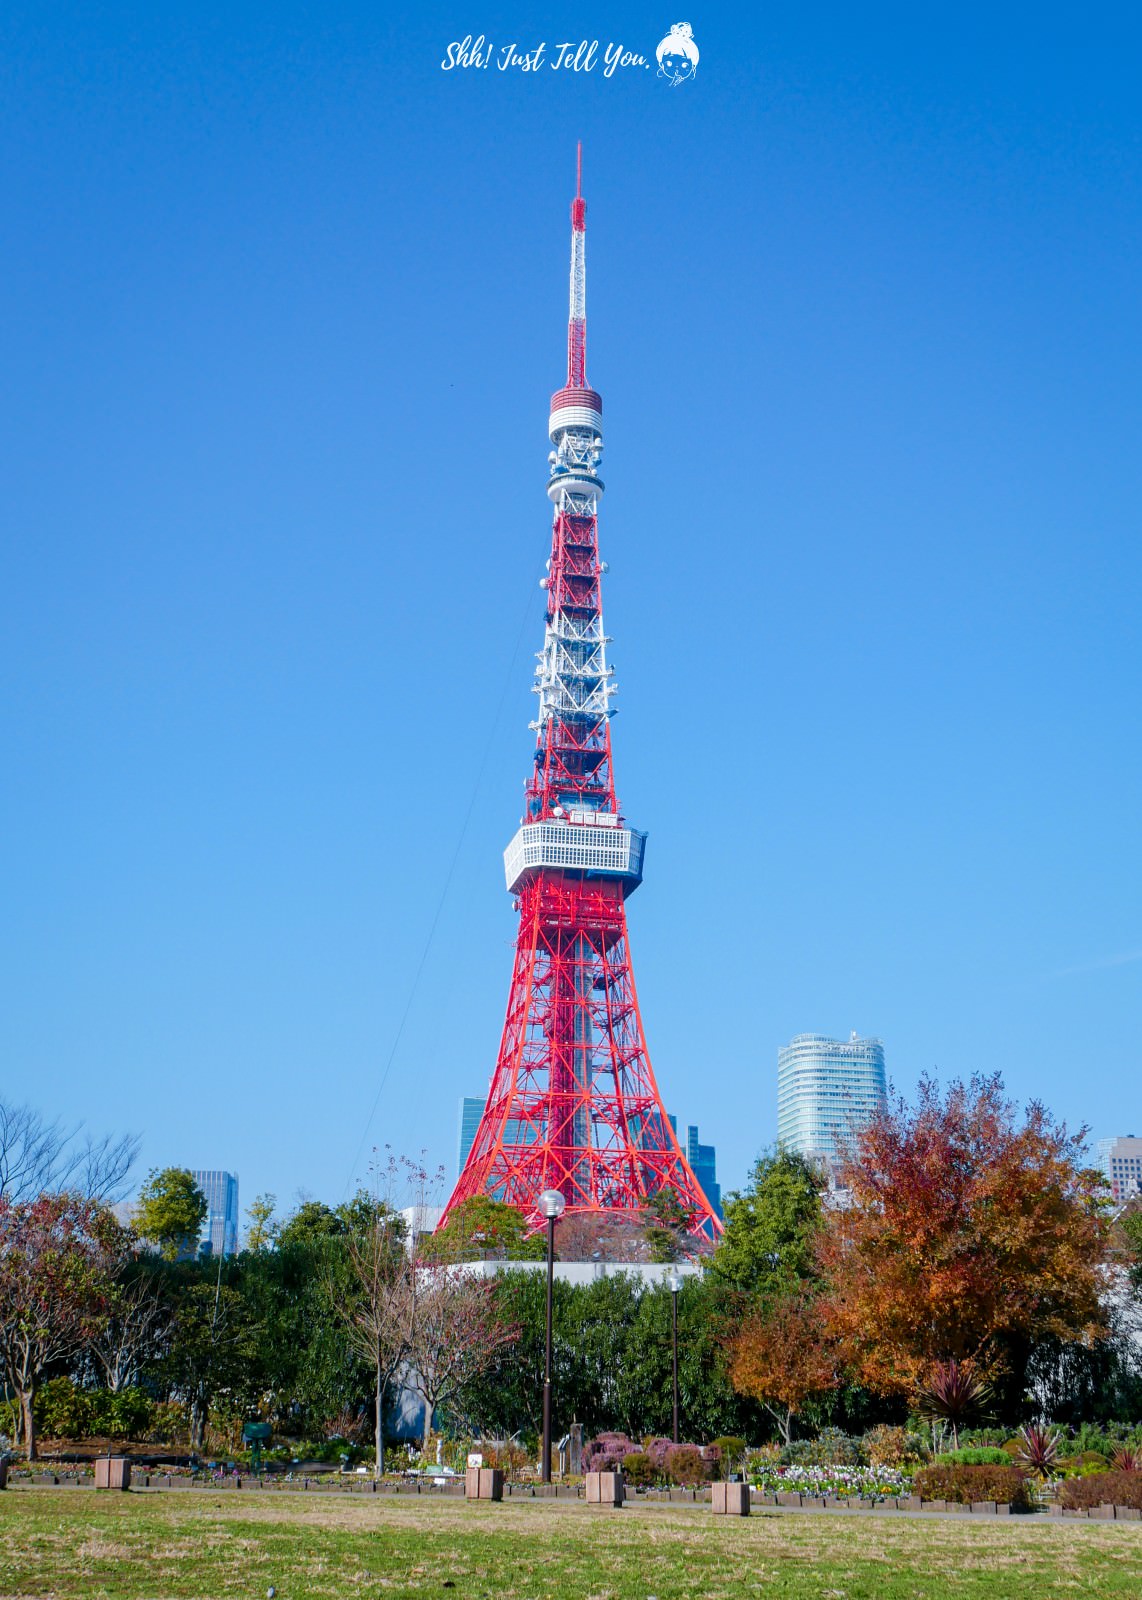 Tokyo Tower 100 Sceneries - A comprehensive list of recommended photo  spots, from classic spots to spectacular views of the tower when lit up.